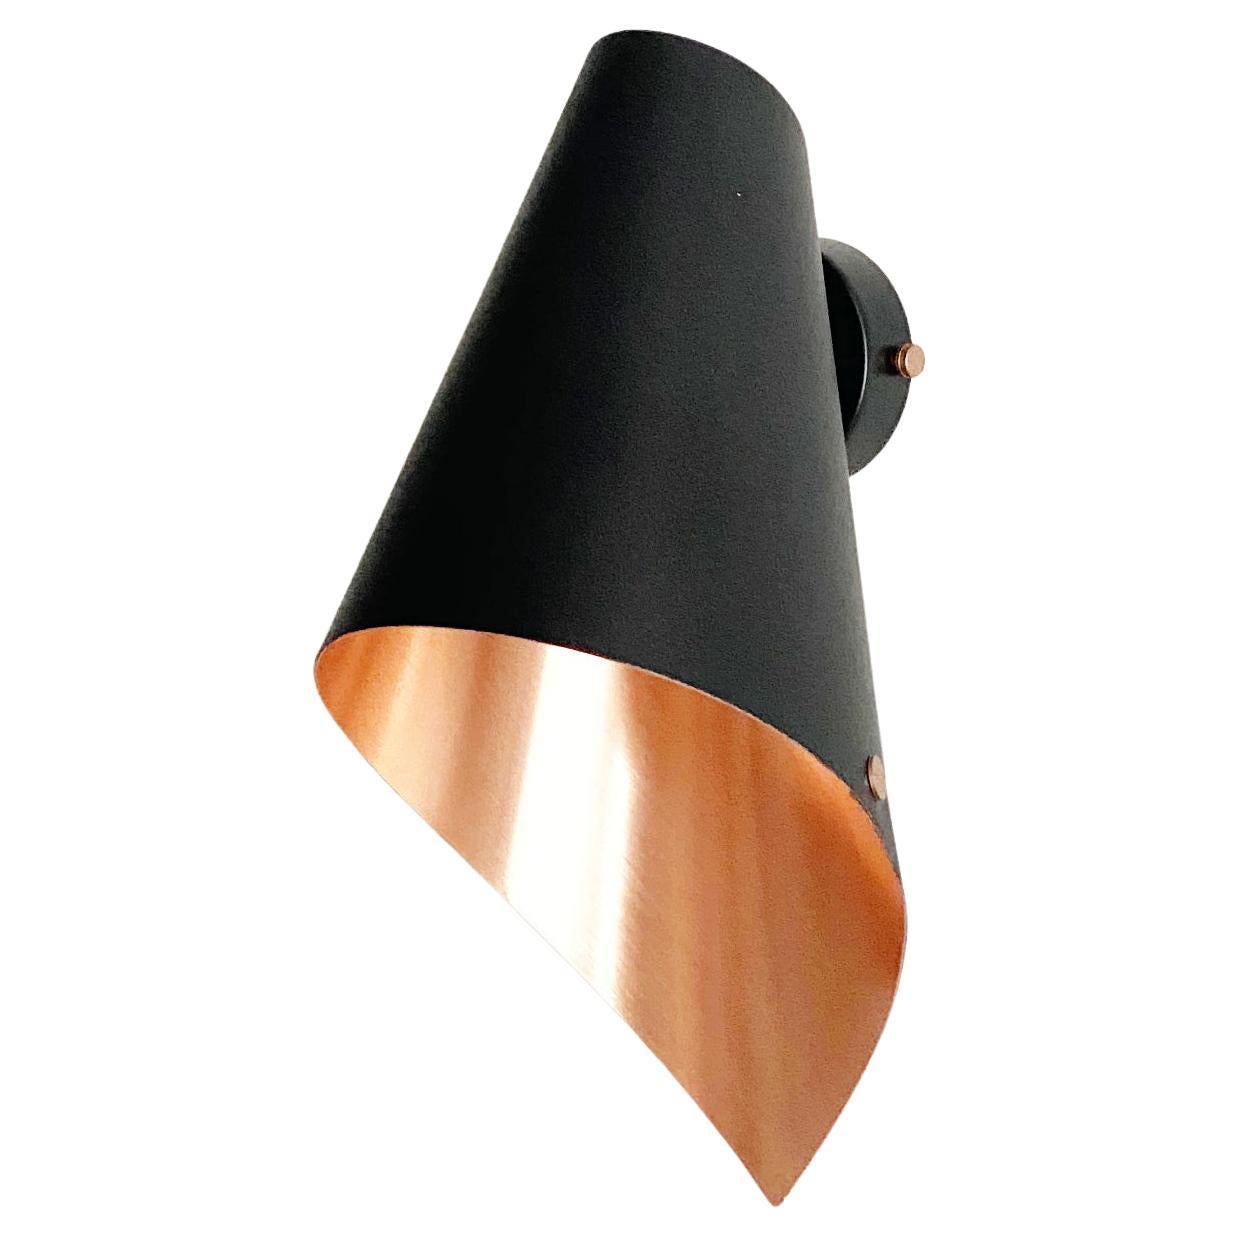 ARC Wall Light in Black and Brushed Copper For Sale